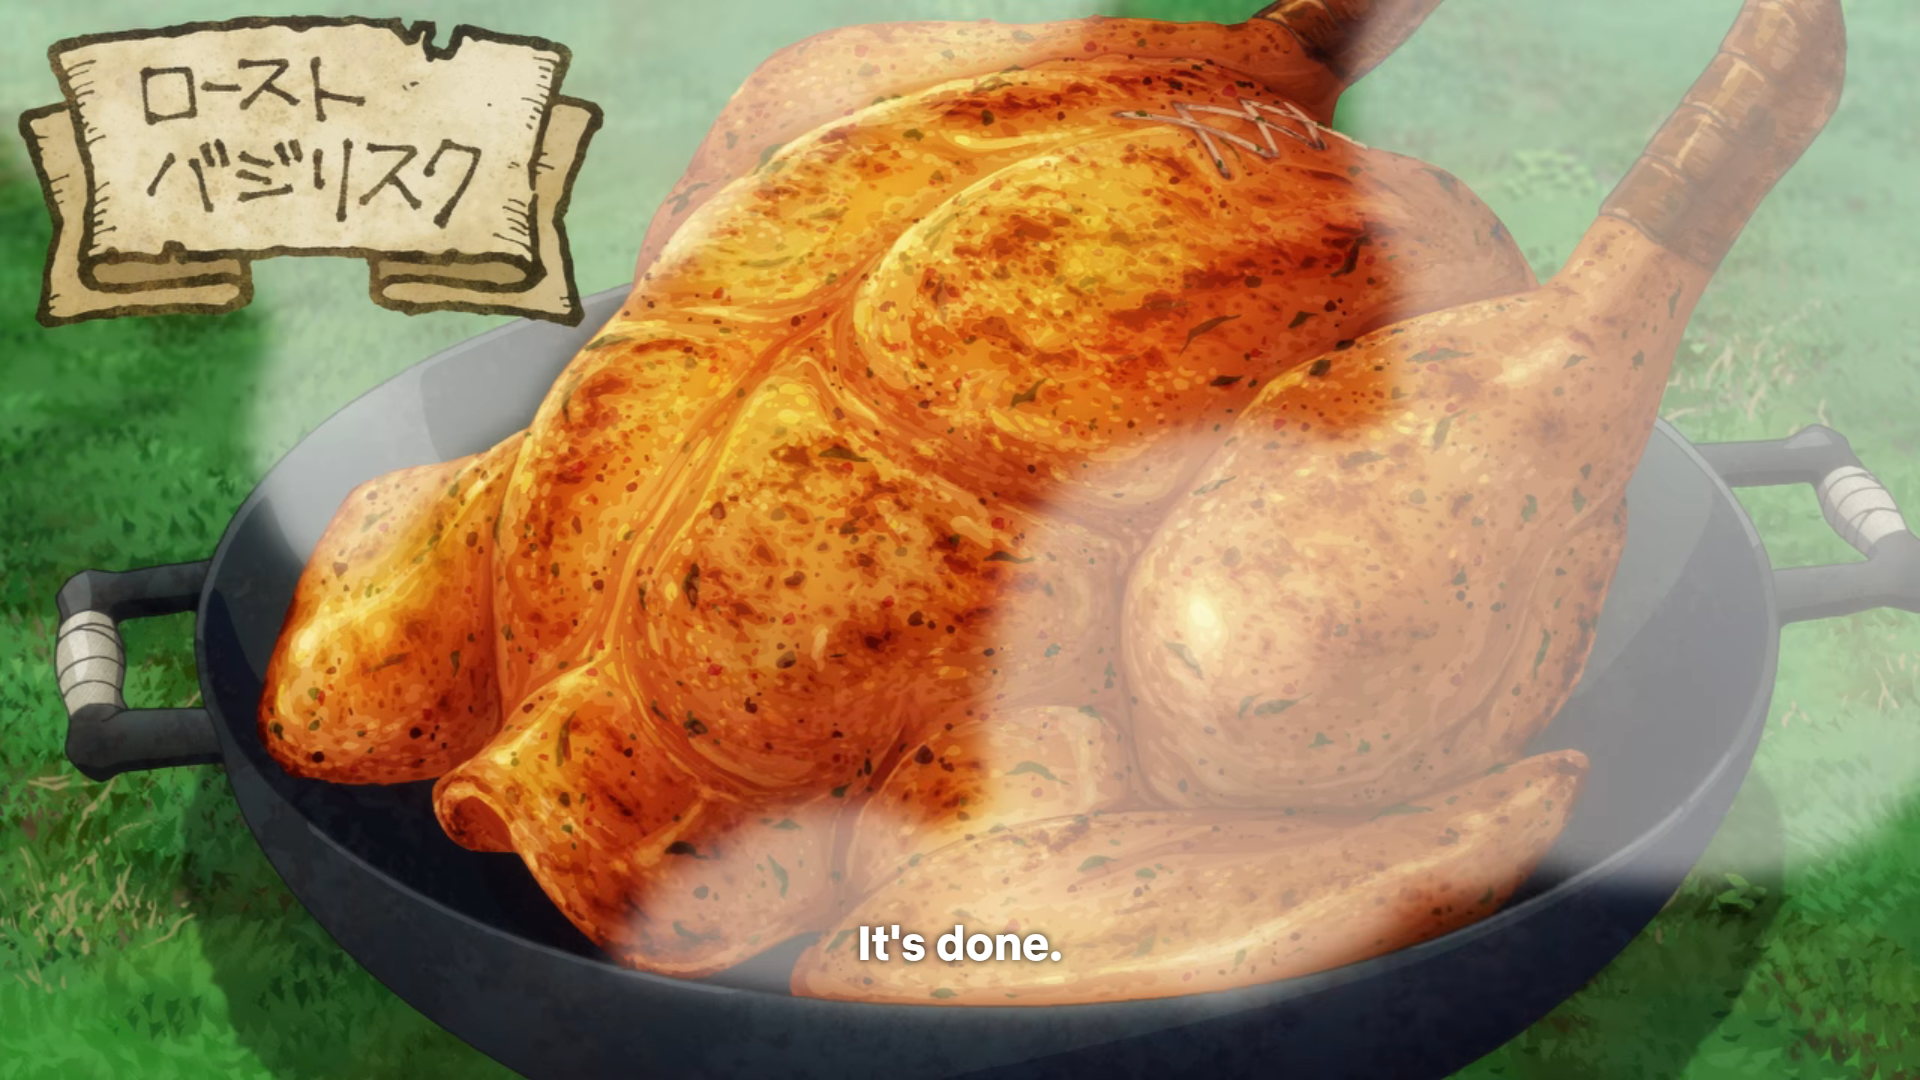 Delicious In Dungeon's second episode really knows how to make people hungry with their depictions of roasted basilisk. 